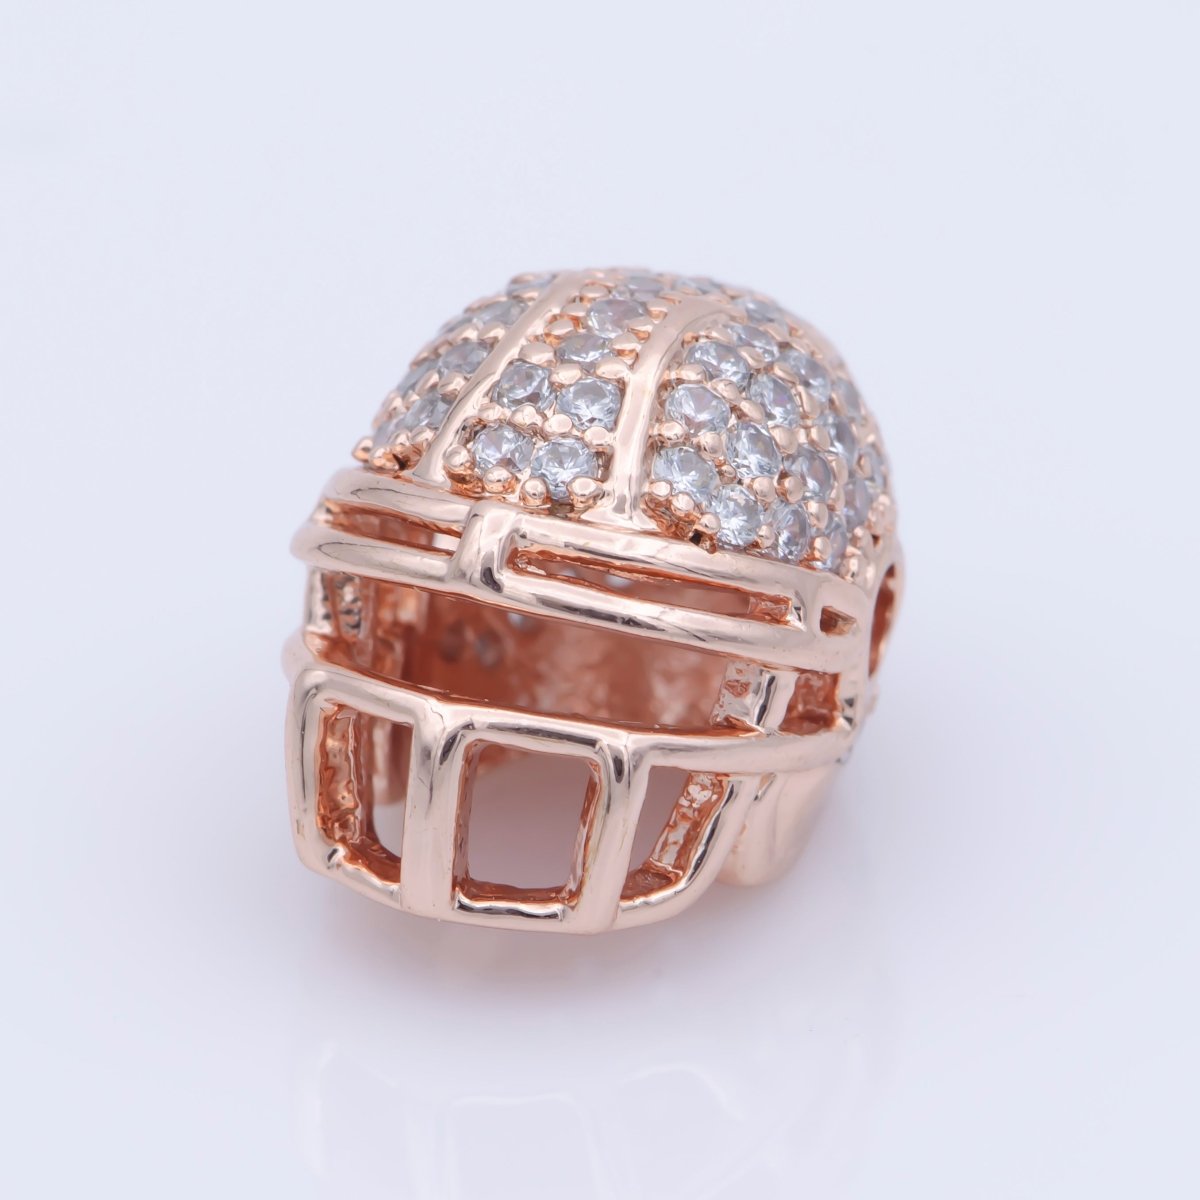 On Sale! CLEARANCE! Cubic Zirconia Crystal American Football Sport Hemet, Copper Gold Filled Charm CONNECTOR Bracelet Design Plated Material For Jewelry Making F-295 - DLUXCA